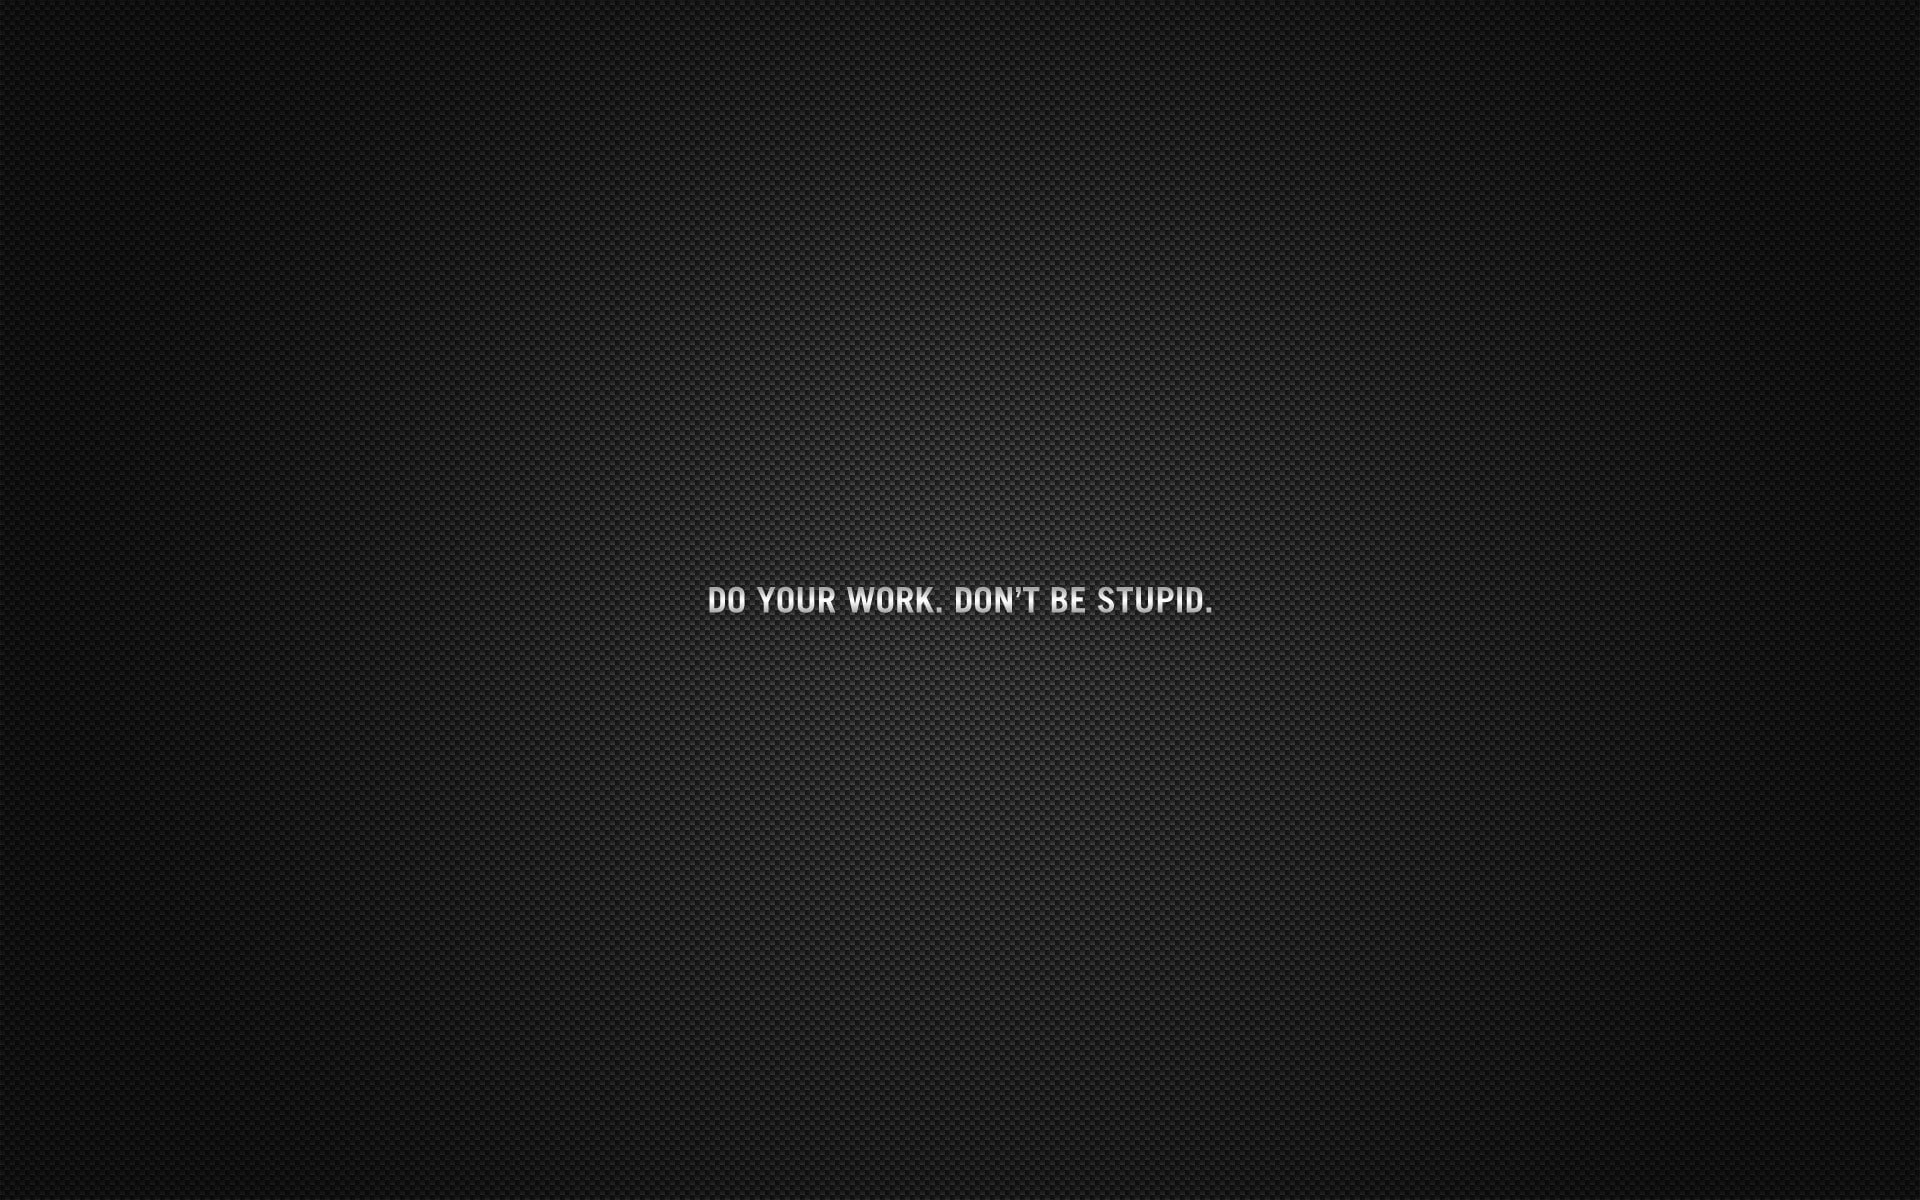 Do your work don’t be stupid wallpaper, quote, motivational, minimalism, typography